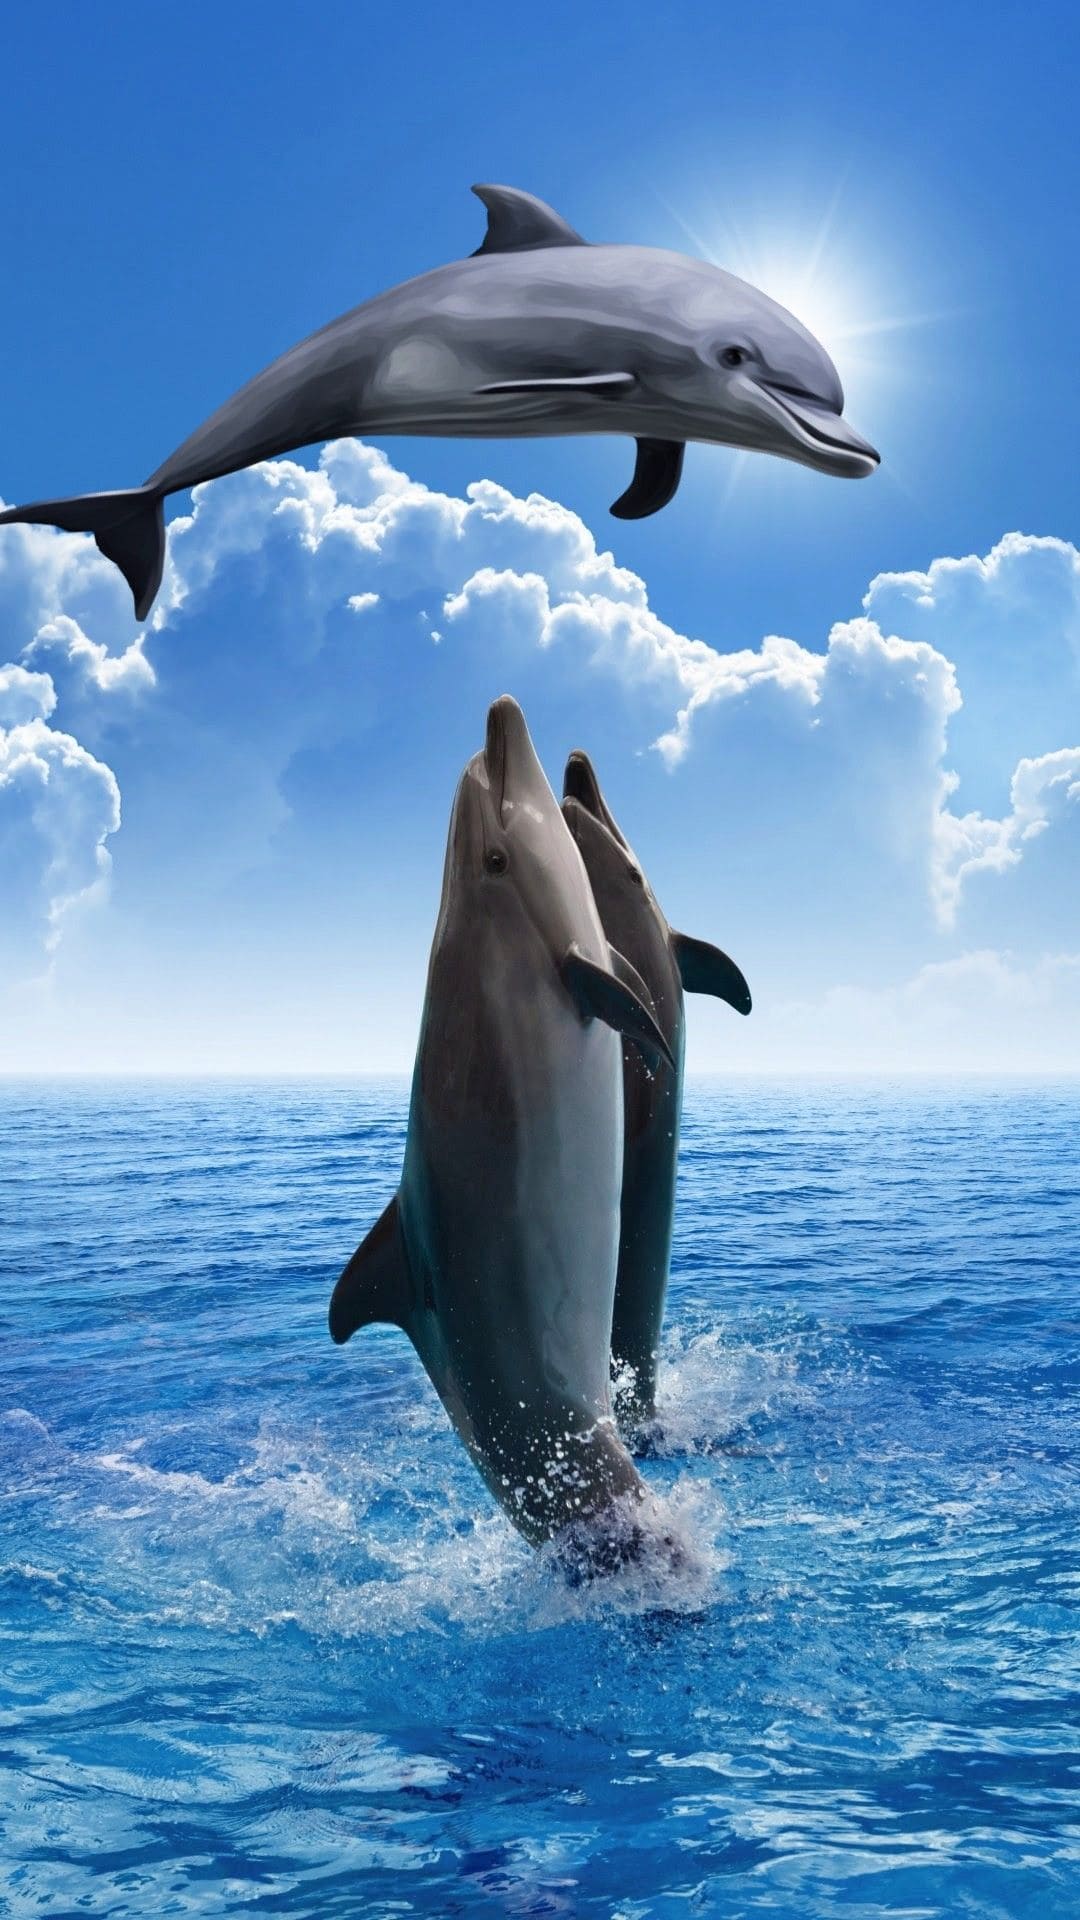 dolphin» 1080P, 2k, 4k HD wallpapers, backgrounds free download | Rare  Gallery » Page 2